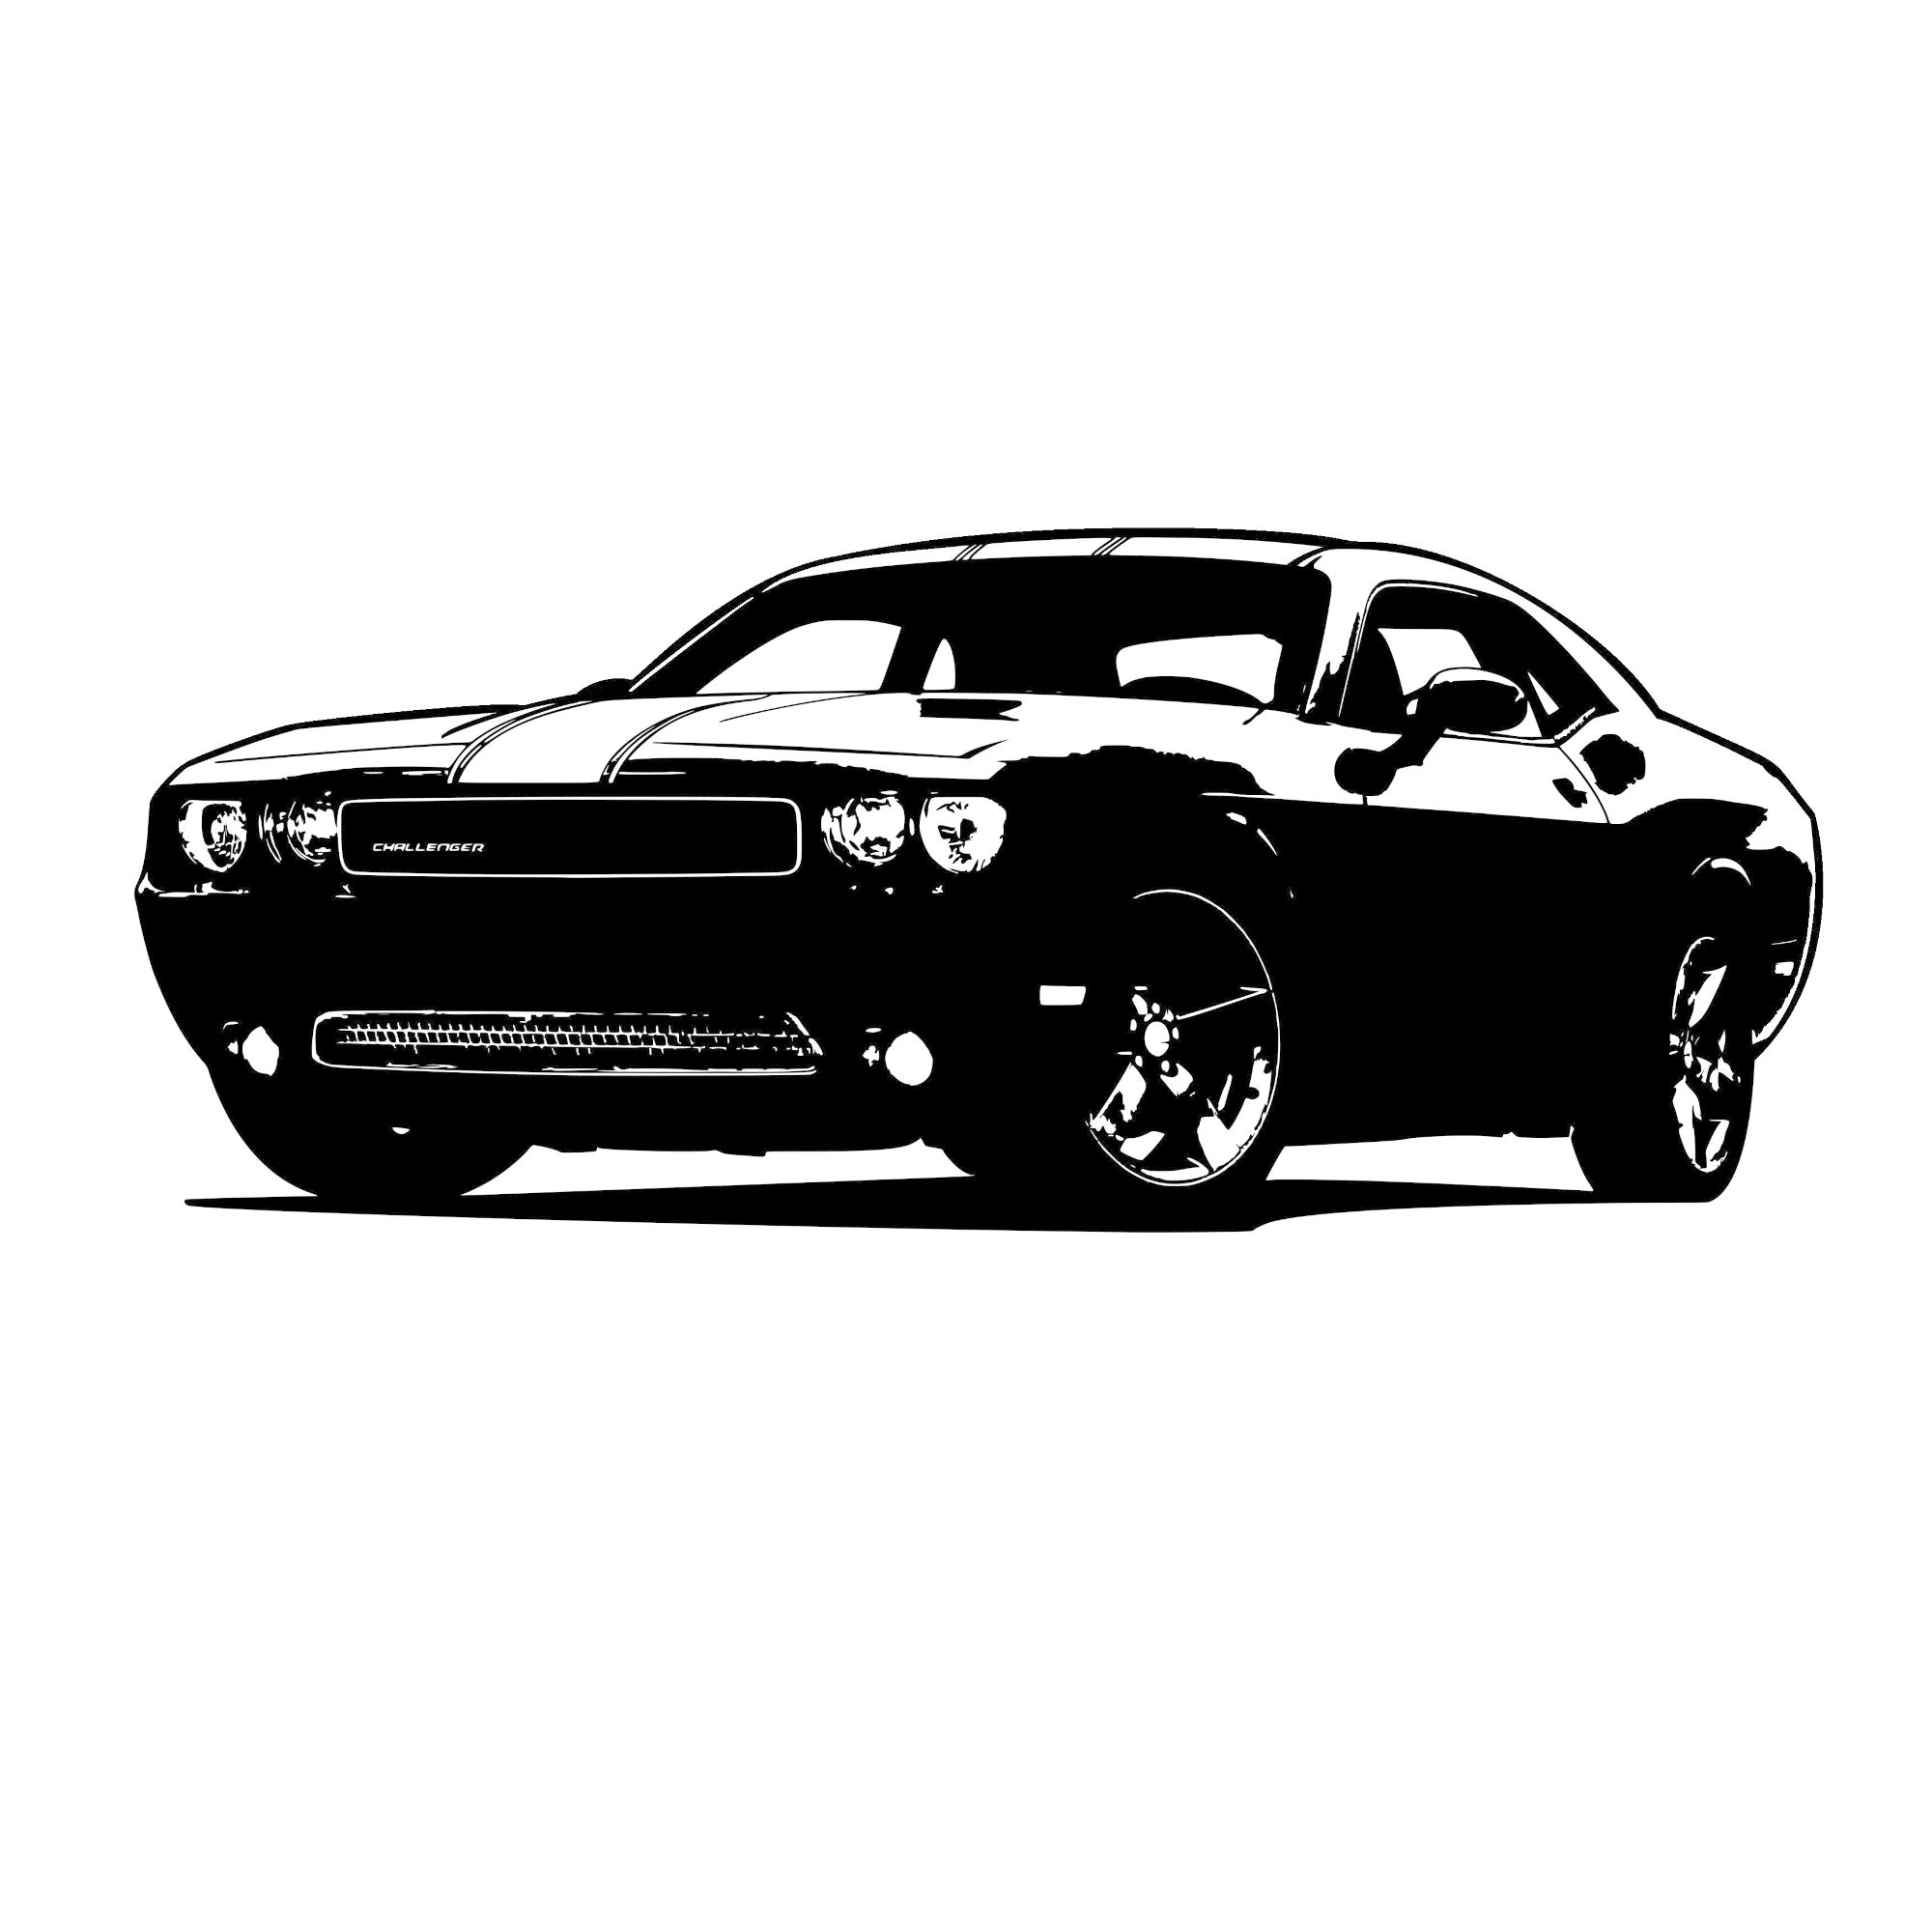 Dodge Challenger - Fast and Furious 6